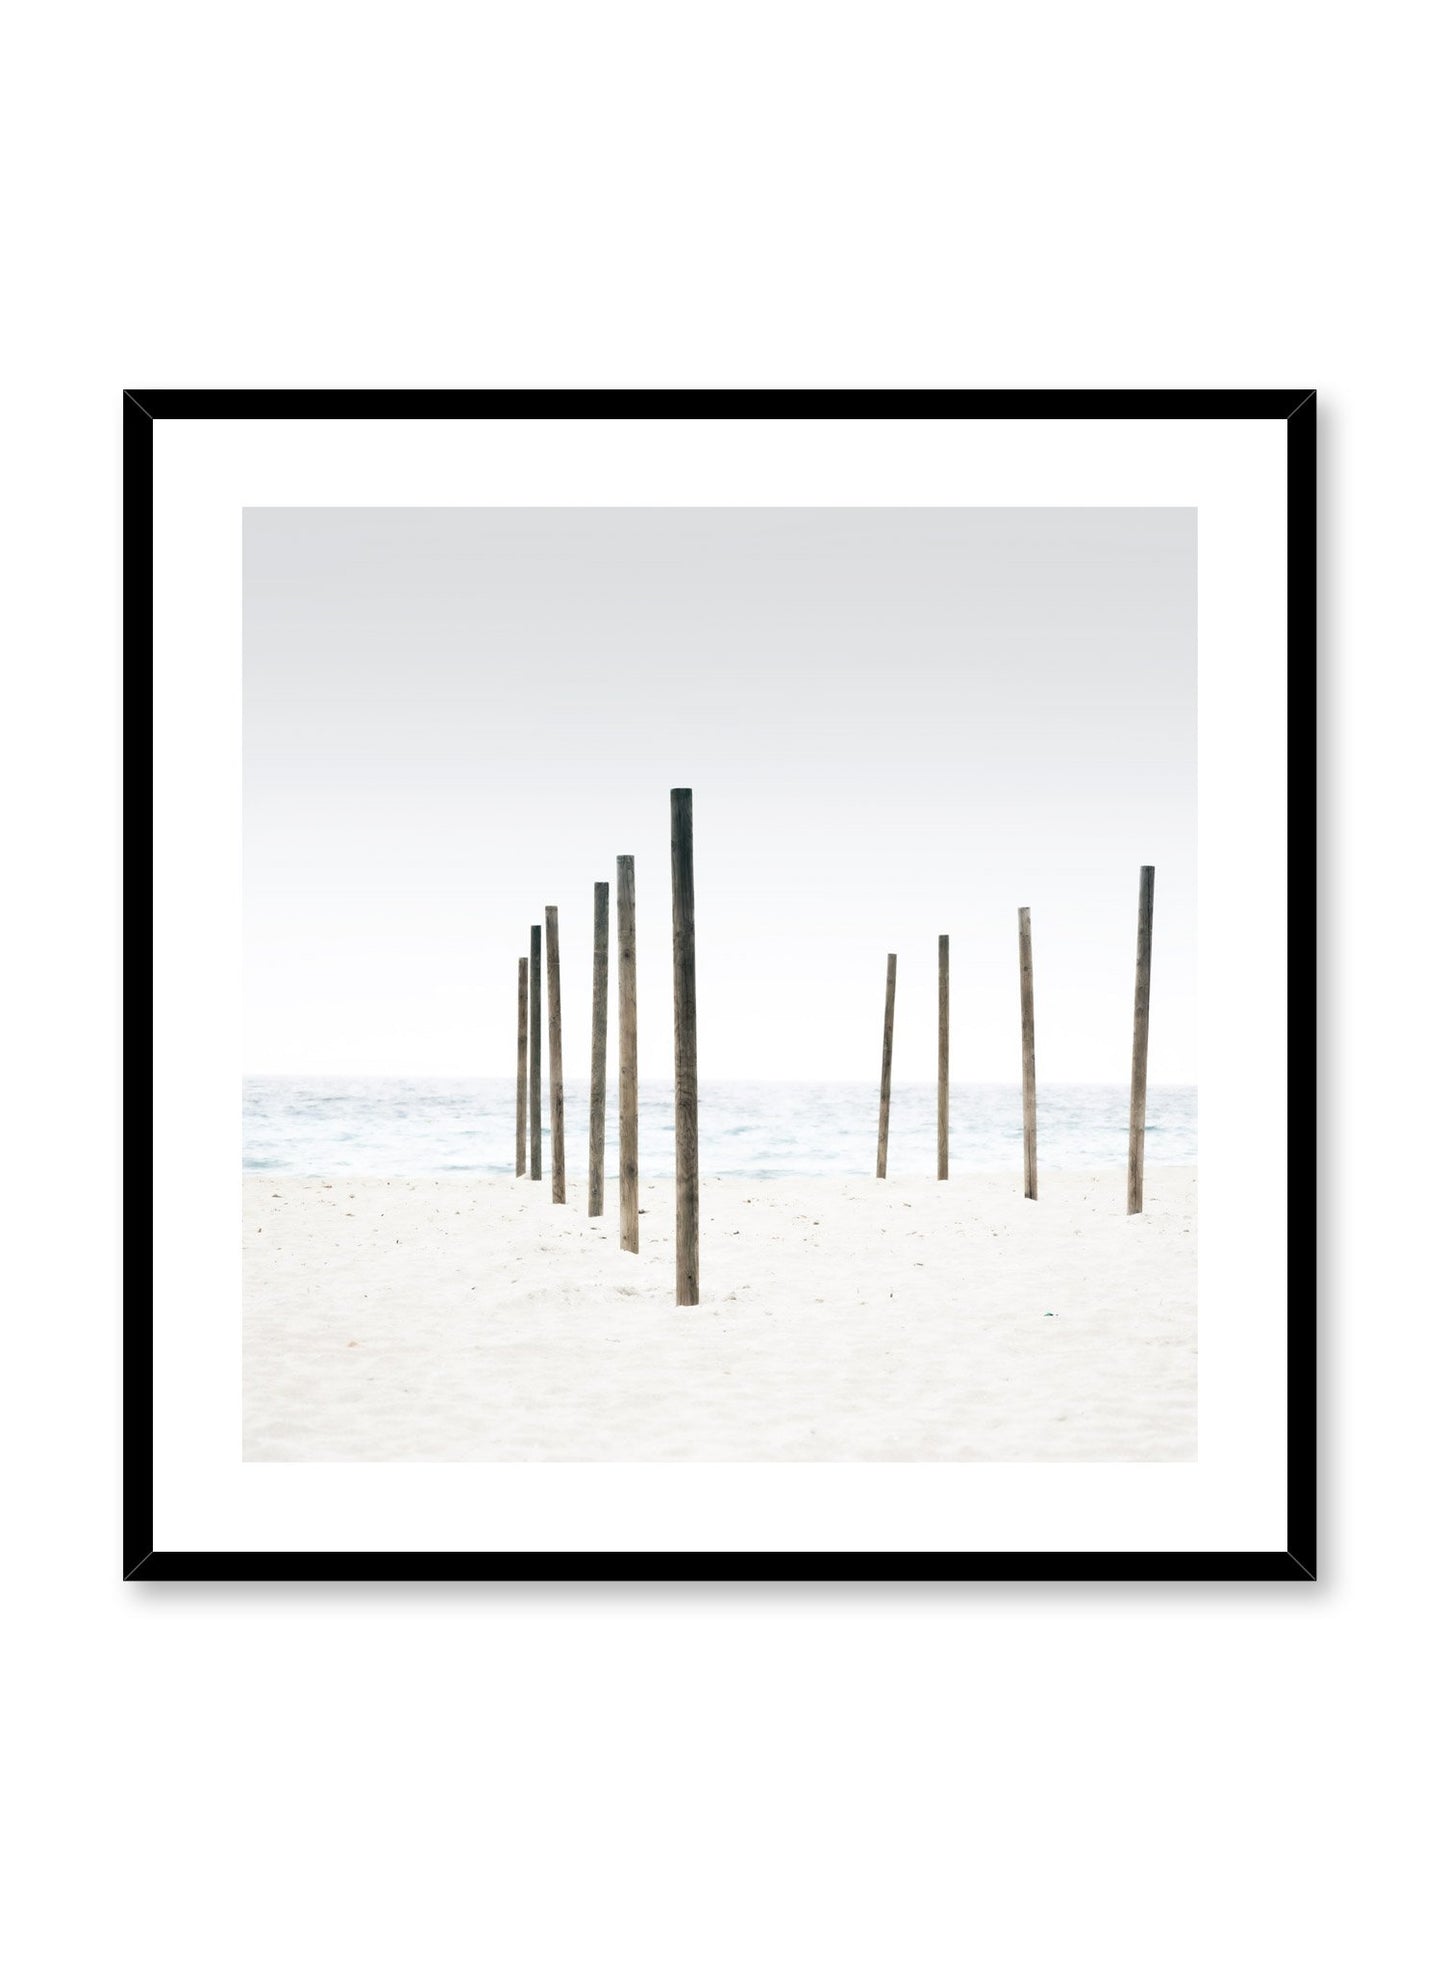 Minimalist design photography poster of Sandy Beach by Love Warriors Creative Studio - Buy at Opposite Wall